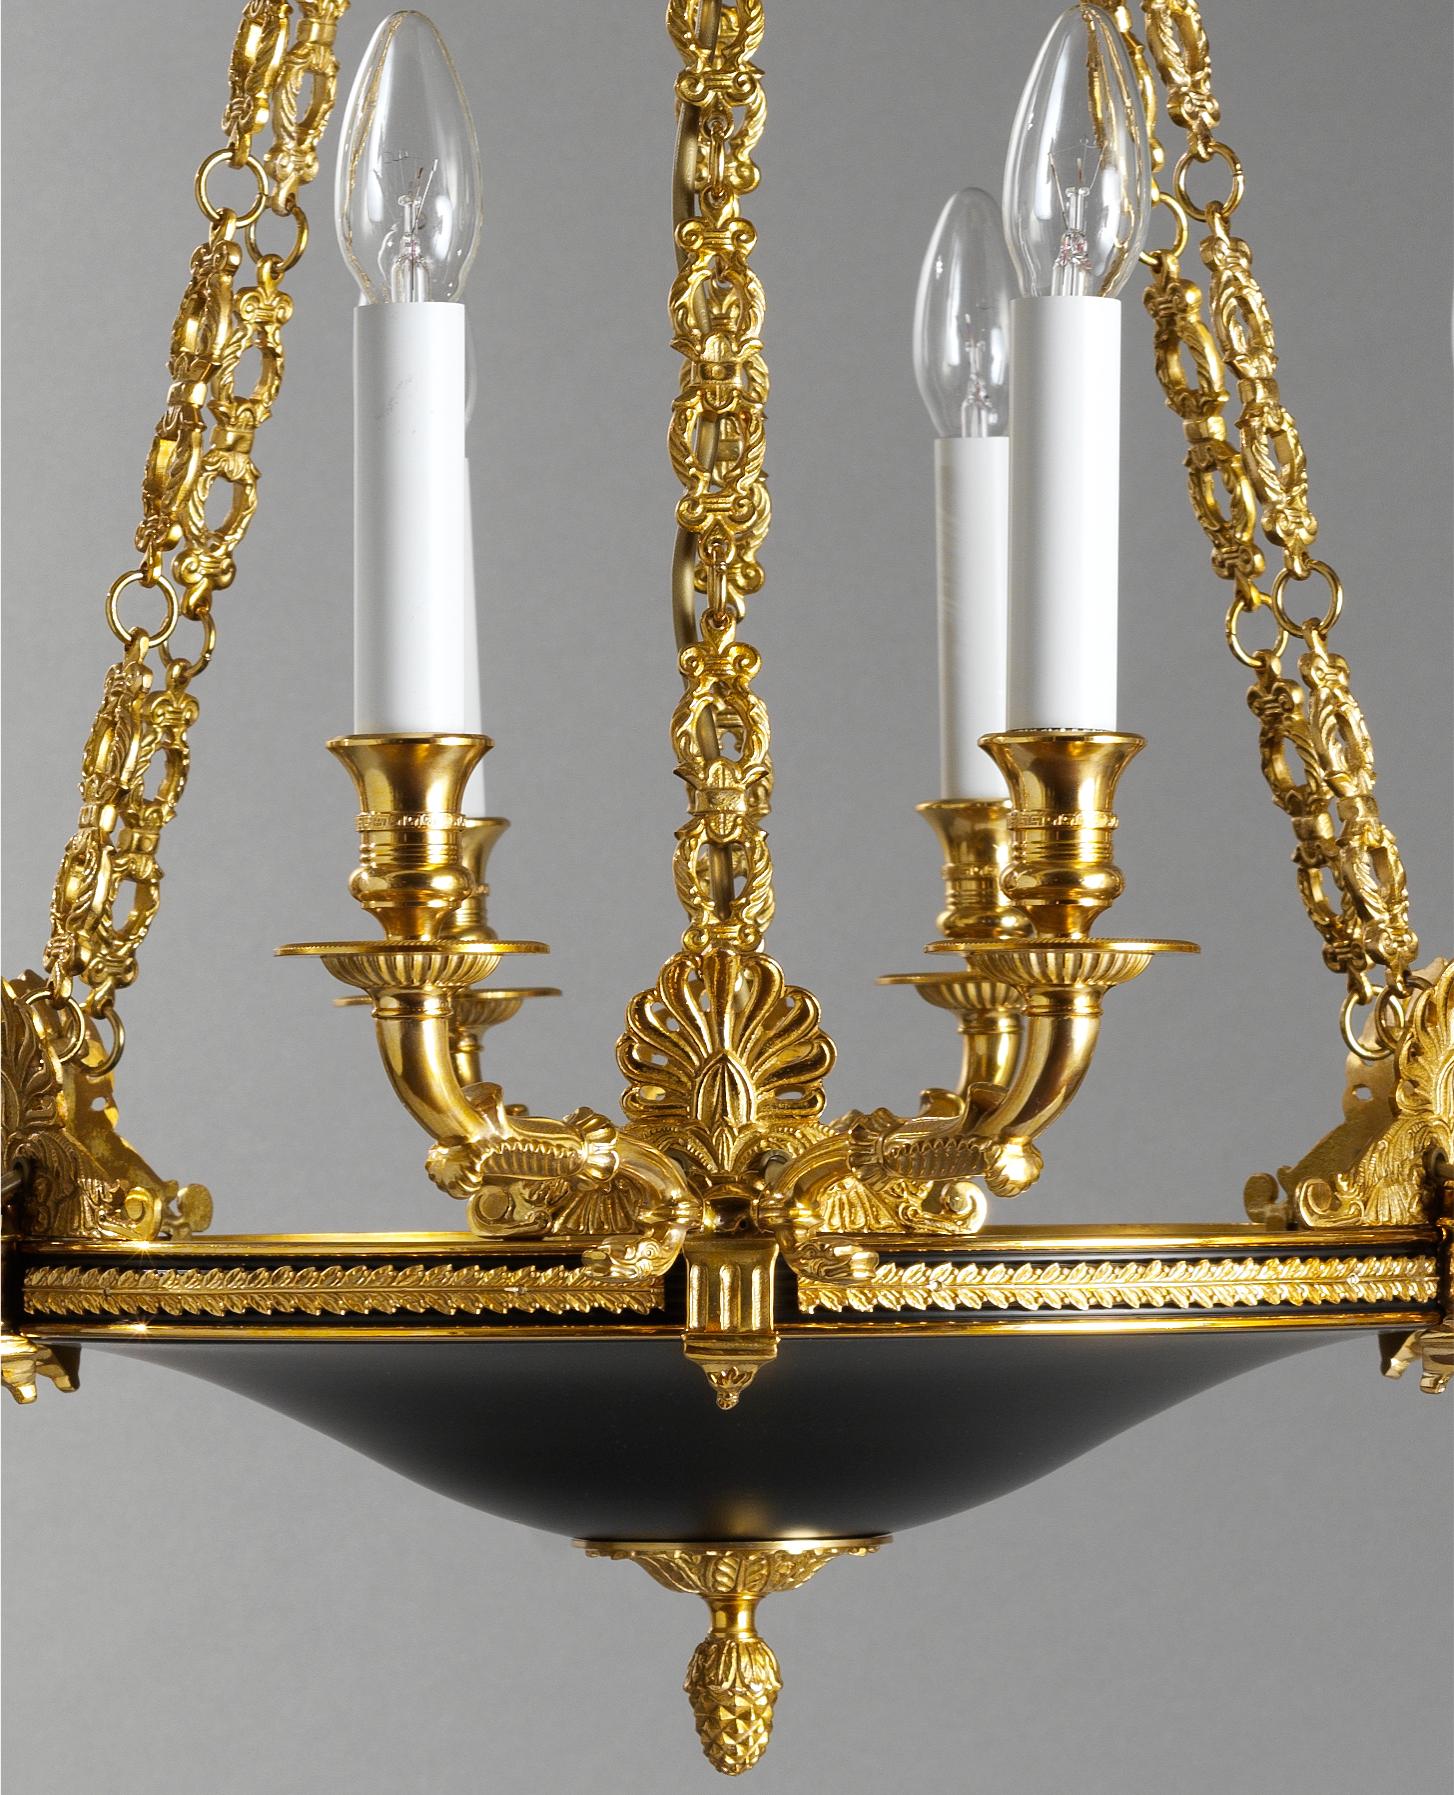 French Empire style gilt bronze and enamel chandelier by Gherardo Degli Albizzi has got  twelve lights.
This chandelier is characterized by classical plate embellished with gilt bronze acroterio and swan arms.
At the top there is a decorative crown